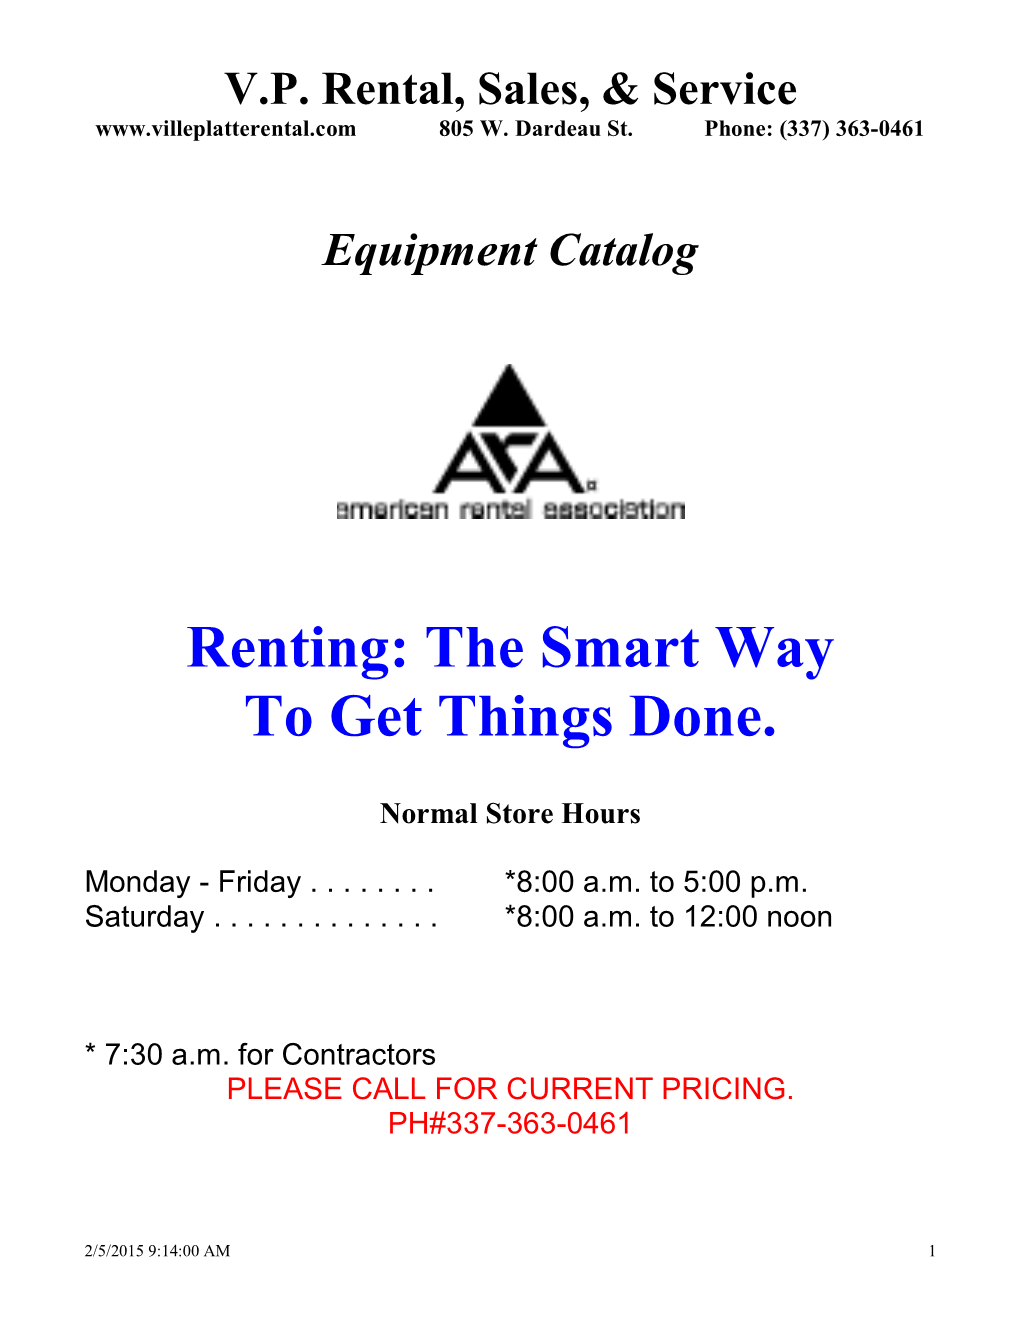 Renting: the Smart Way to Get Things Done